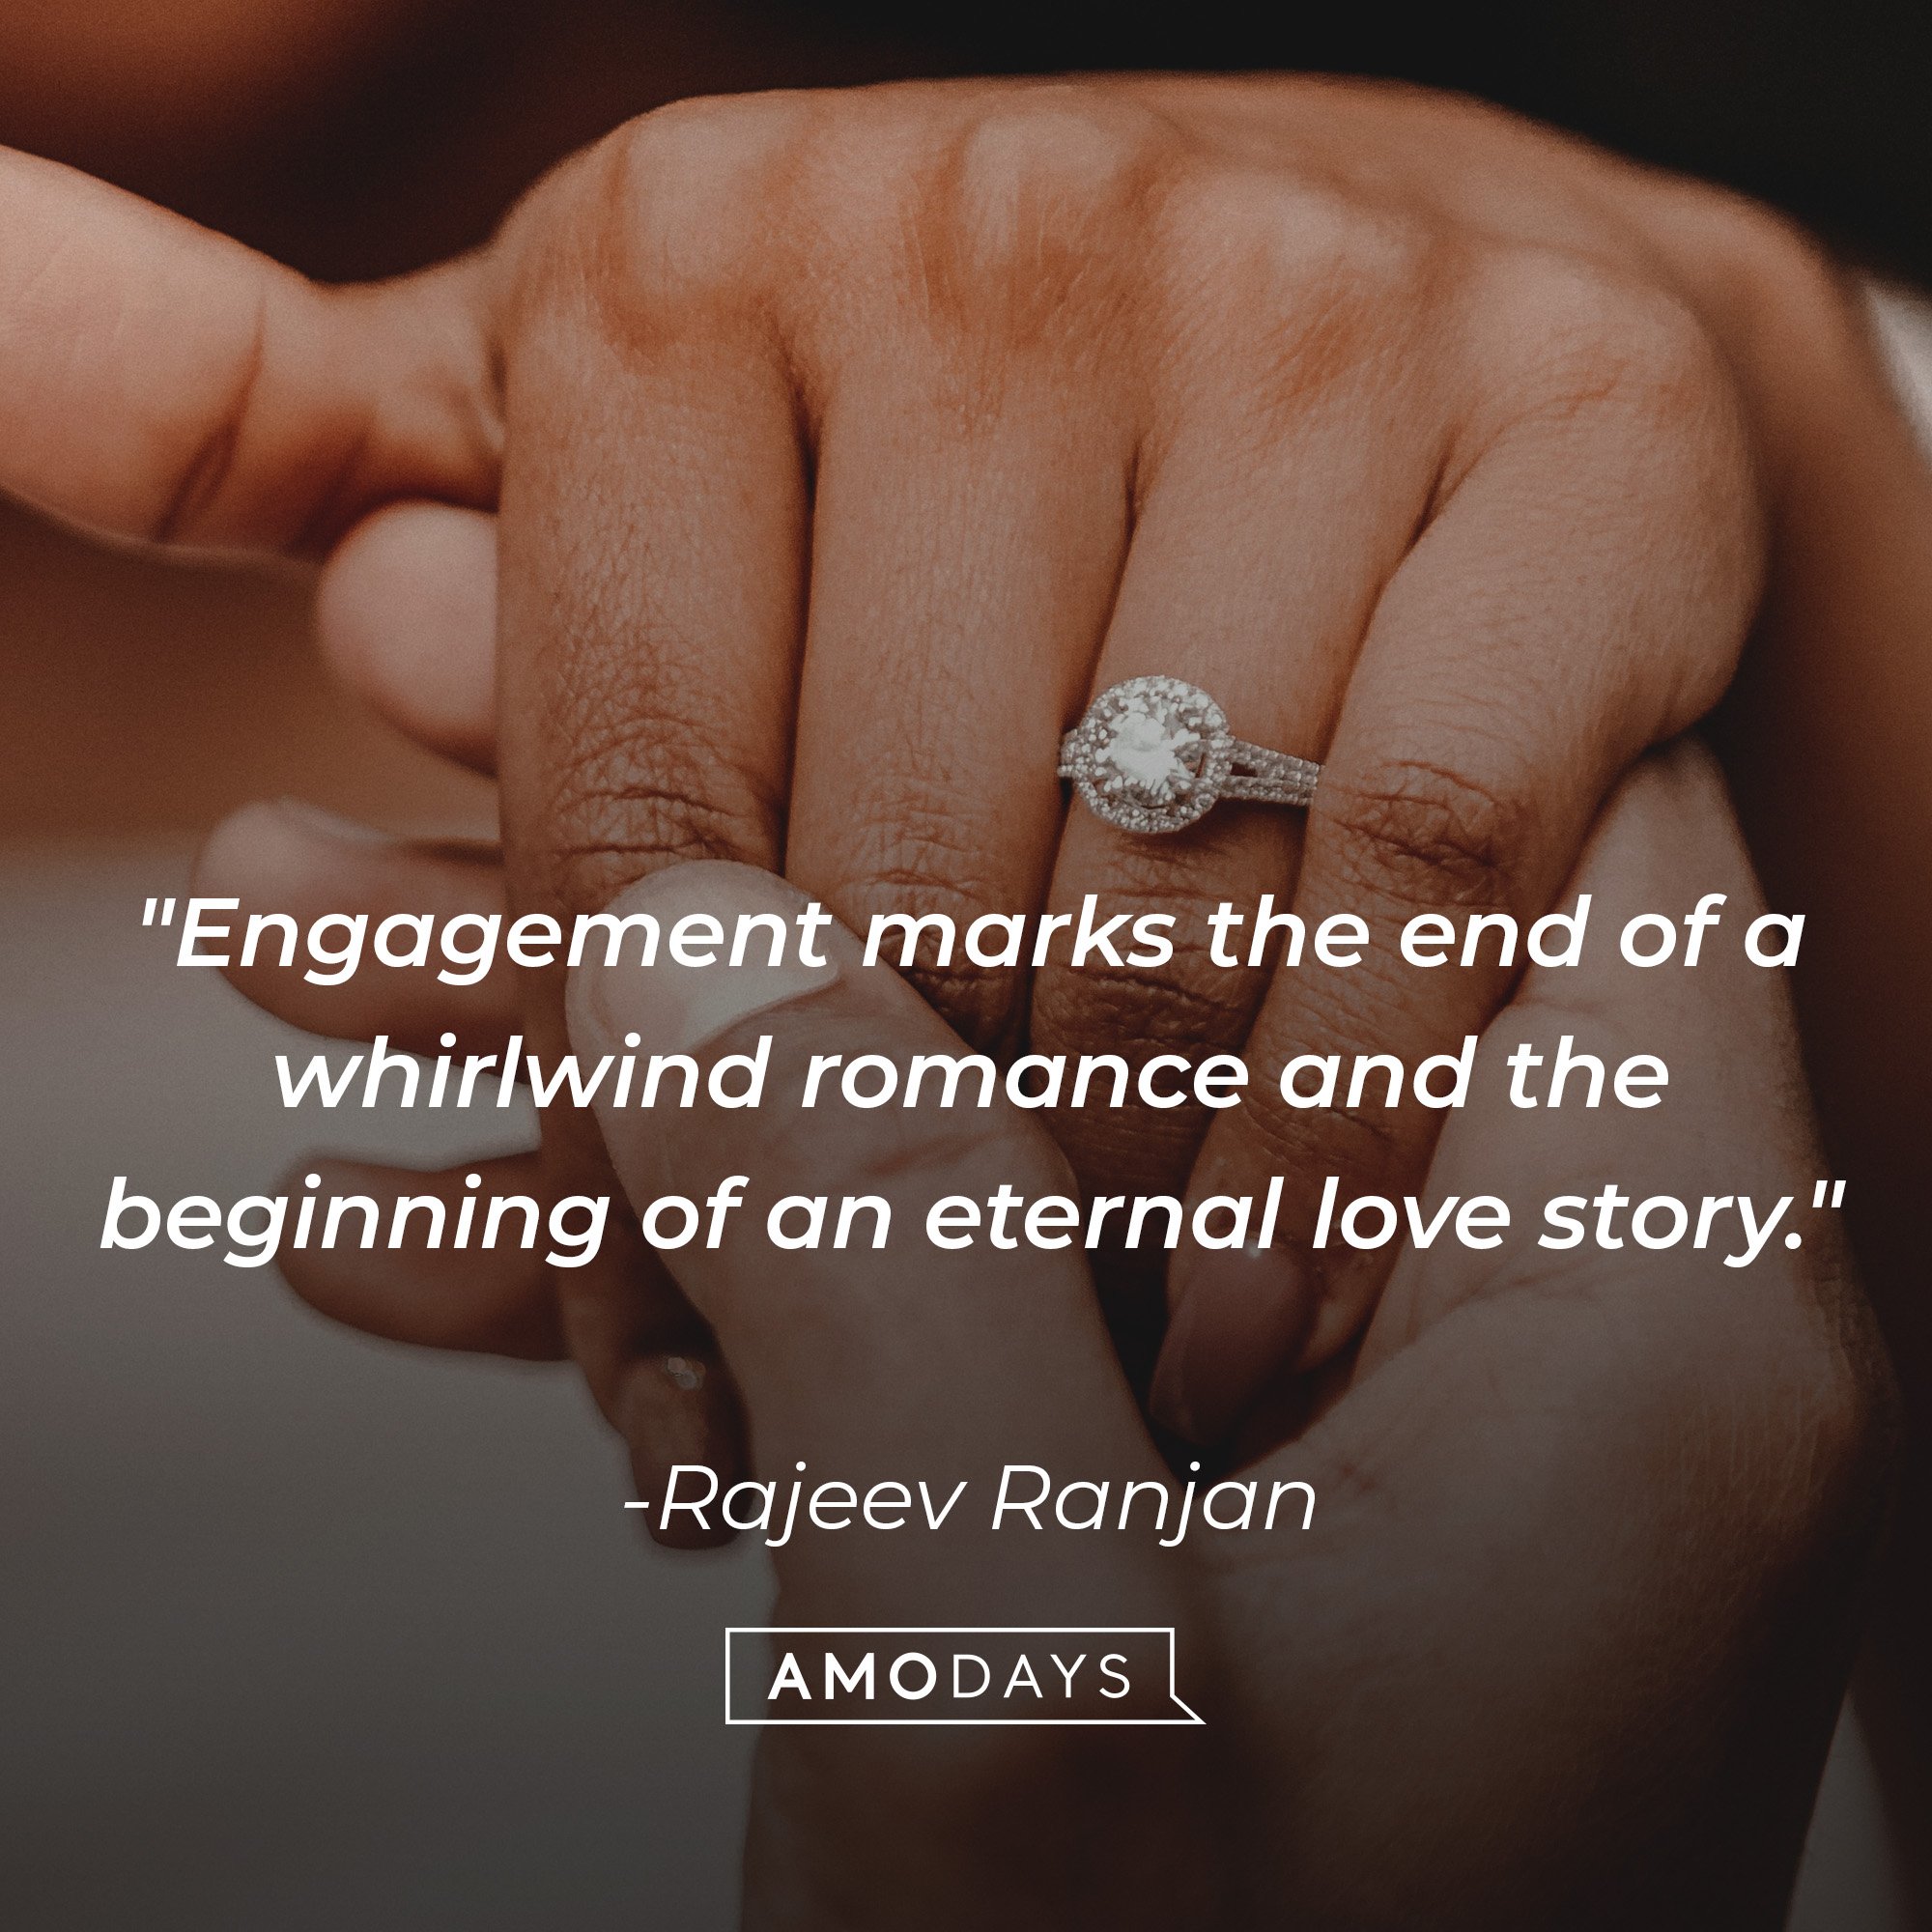 Rajeev Ranjan's quote: "Engagement marks the end of a whirlwind romance and the beginning of an eternal love story." | Image: AmoDays